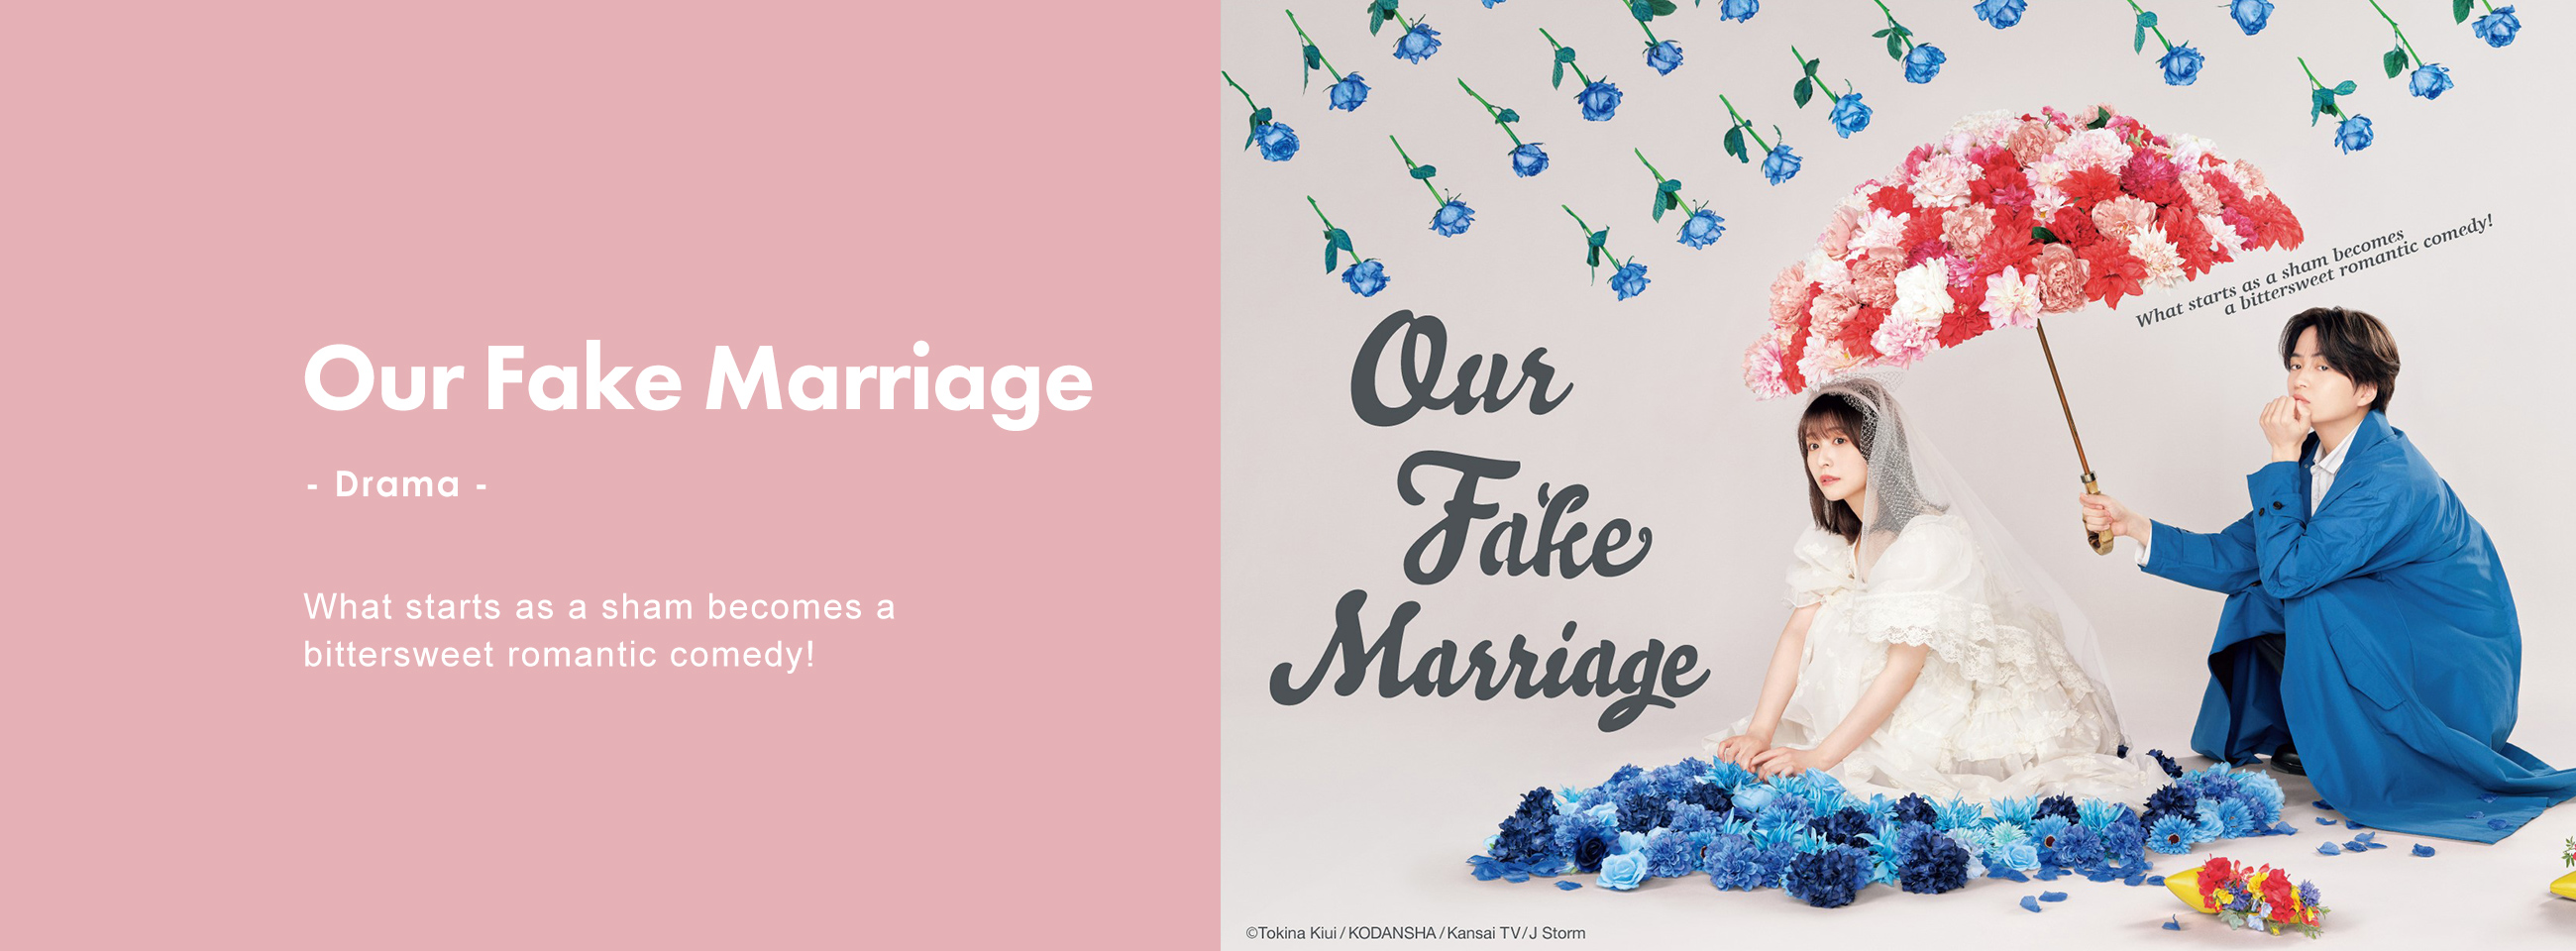 Our Fake Marriage - Drama - What starts as a sham becomes a bittersweet romantic comedy!